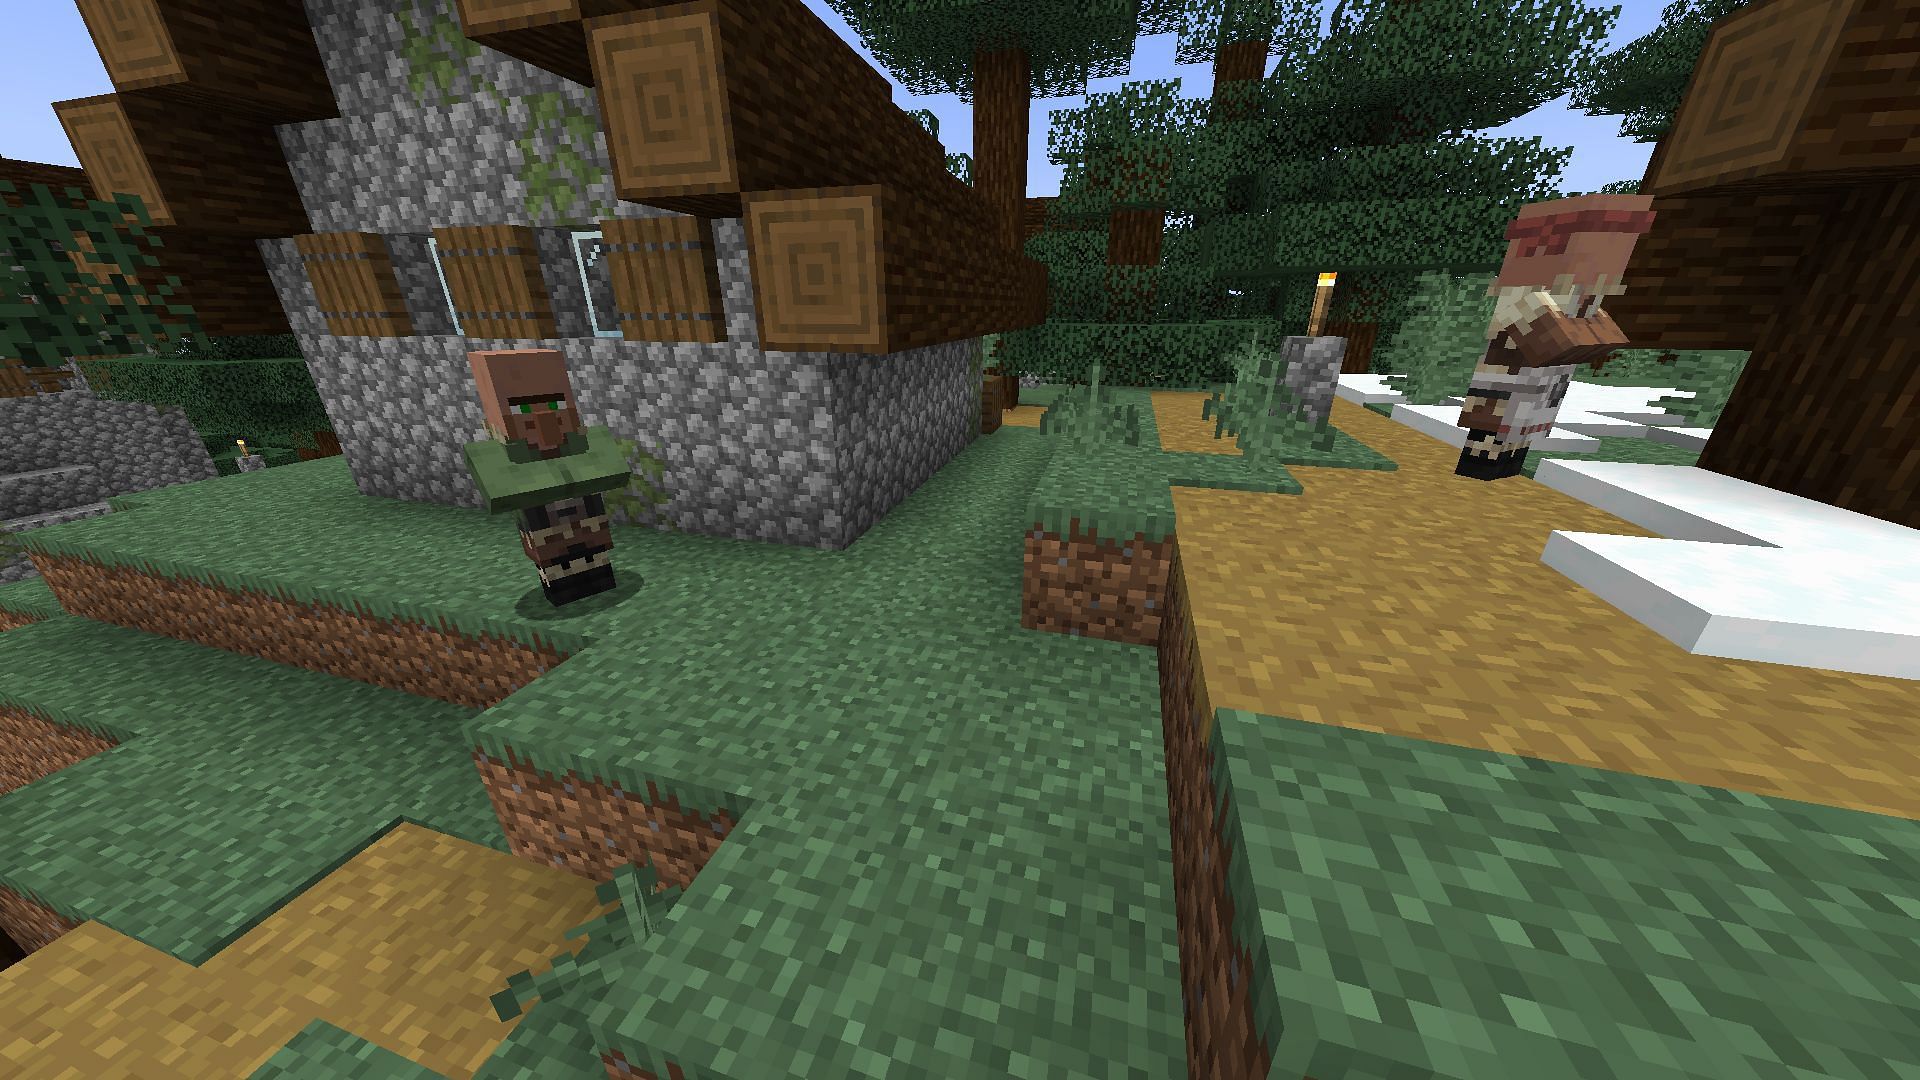 Nitwits interact with other villagers, but they cannot work or trade in Minecraft (Image via Mojang)